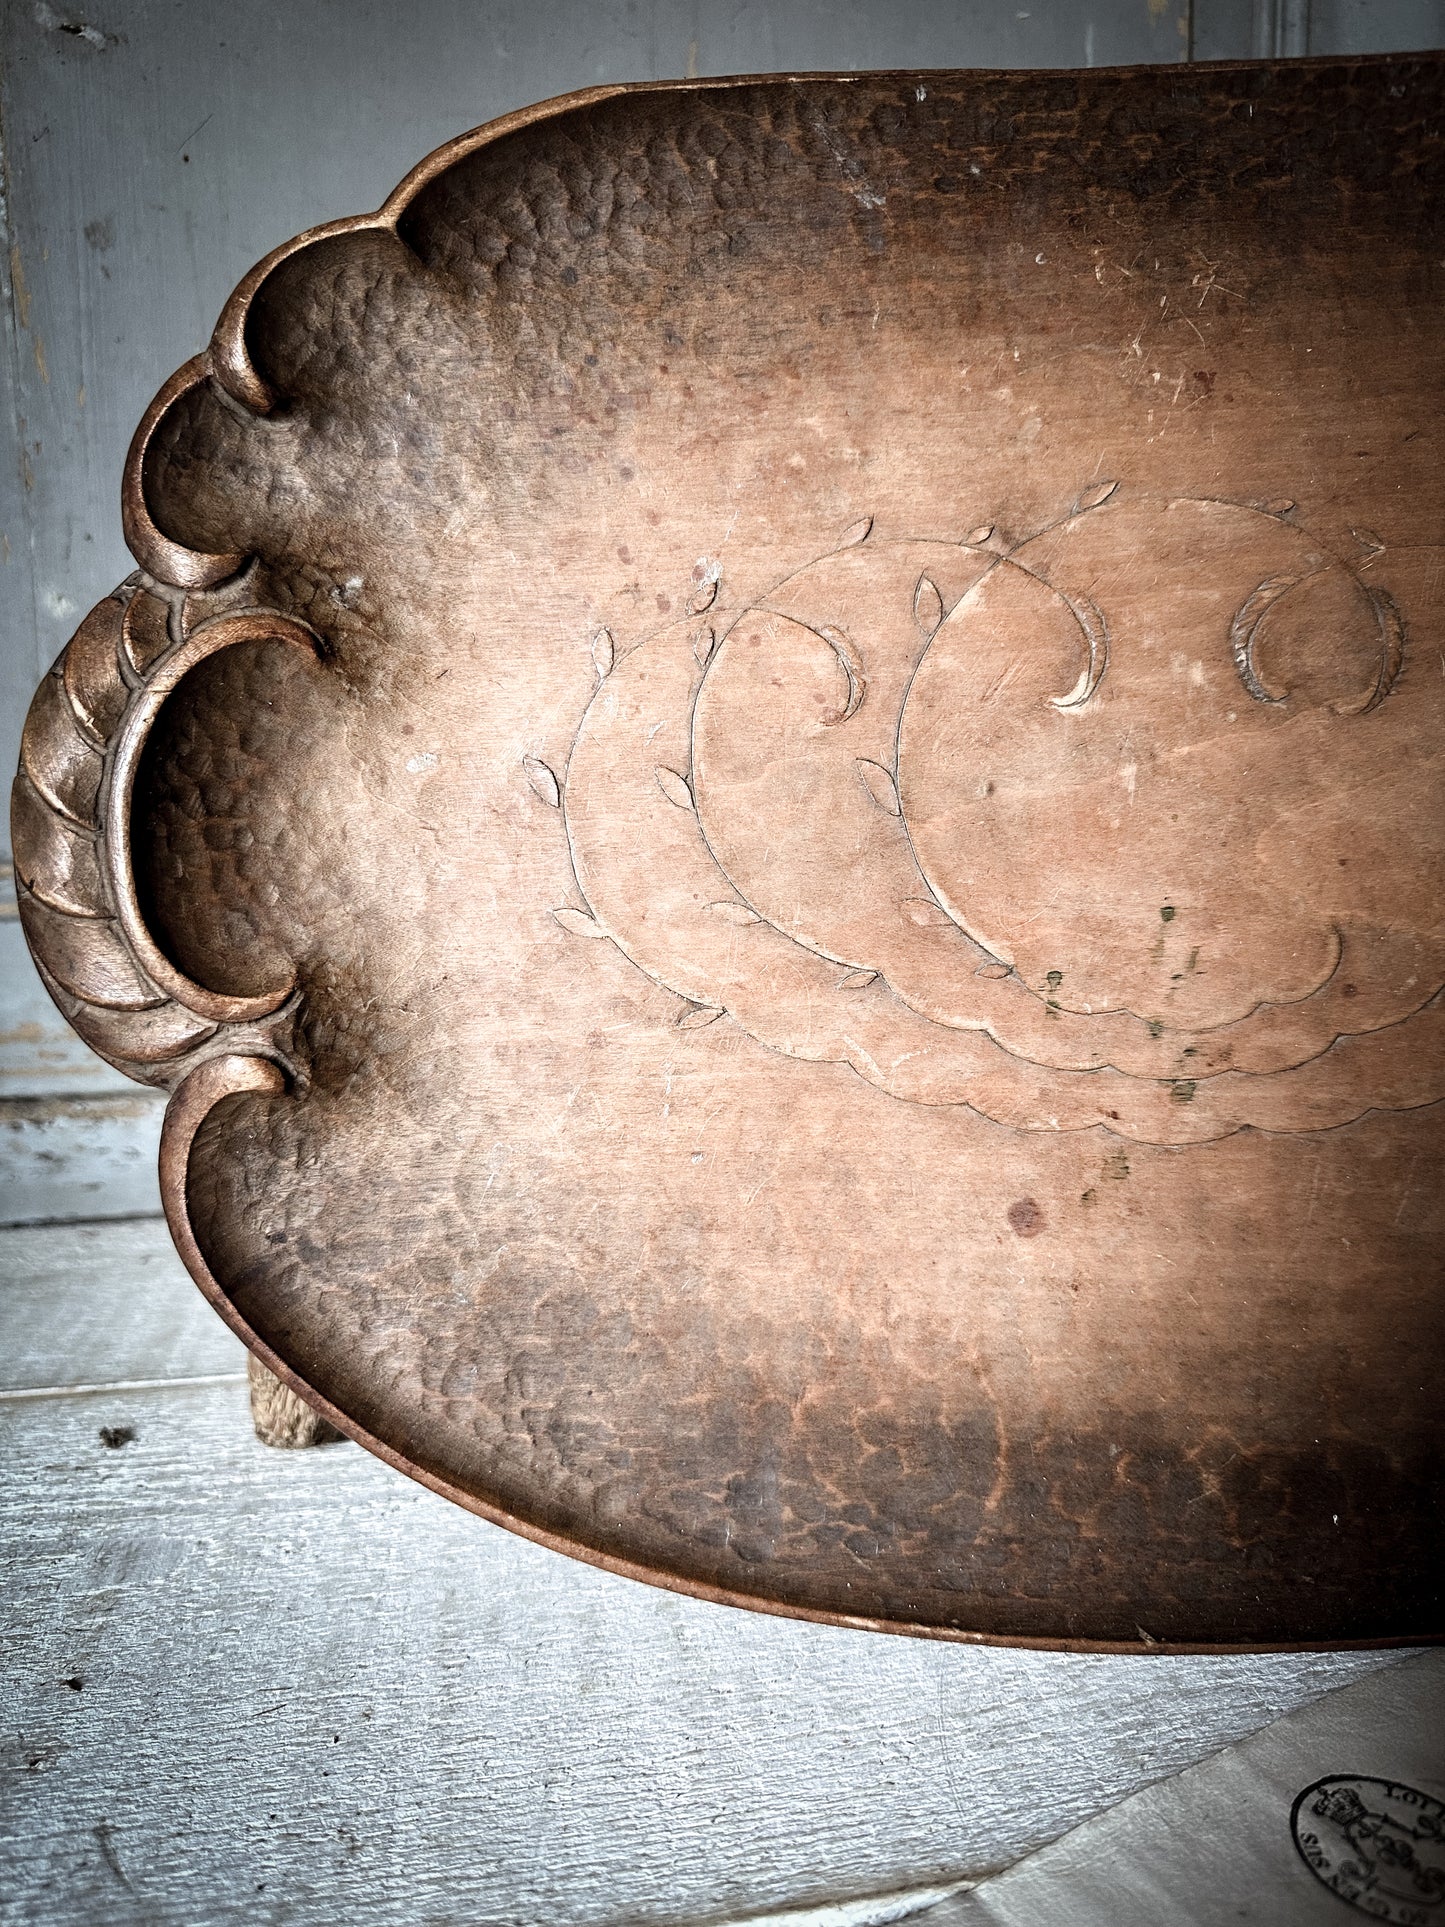 A beautiful antique carved bread tray or bread board